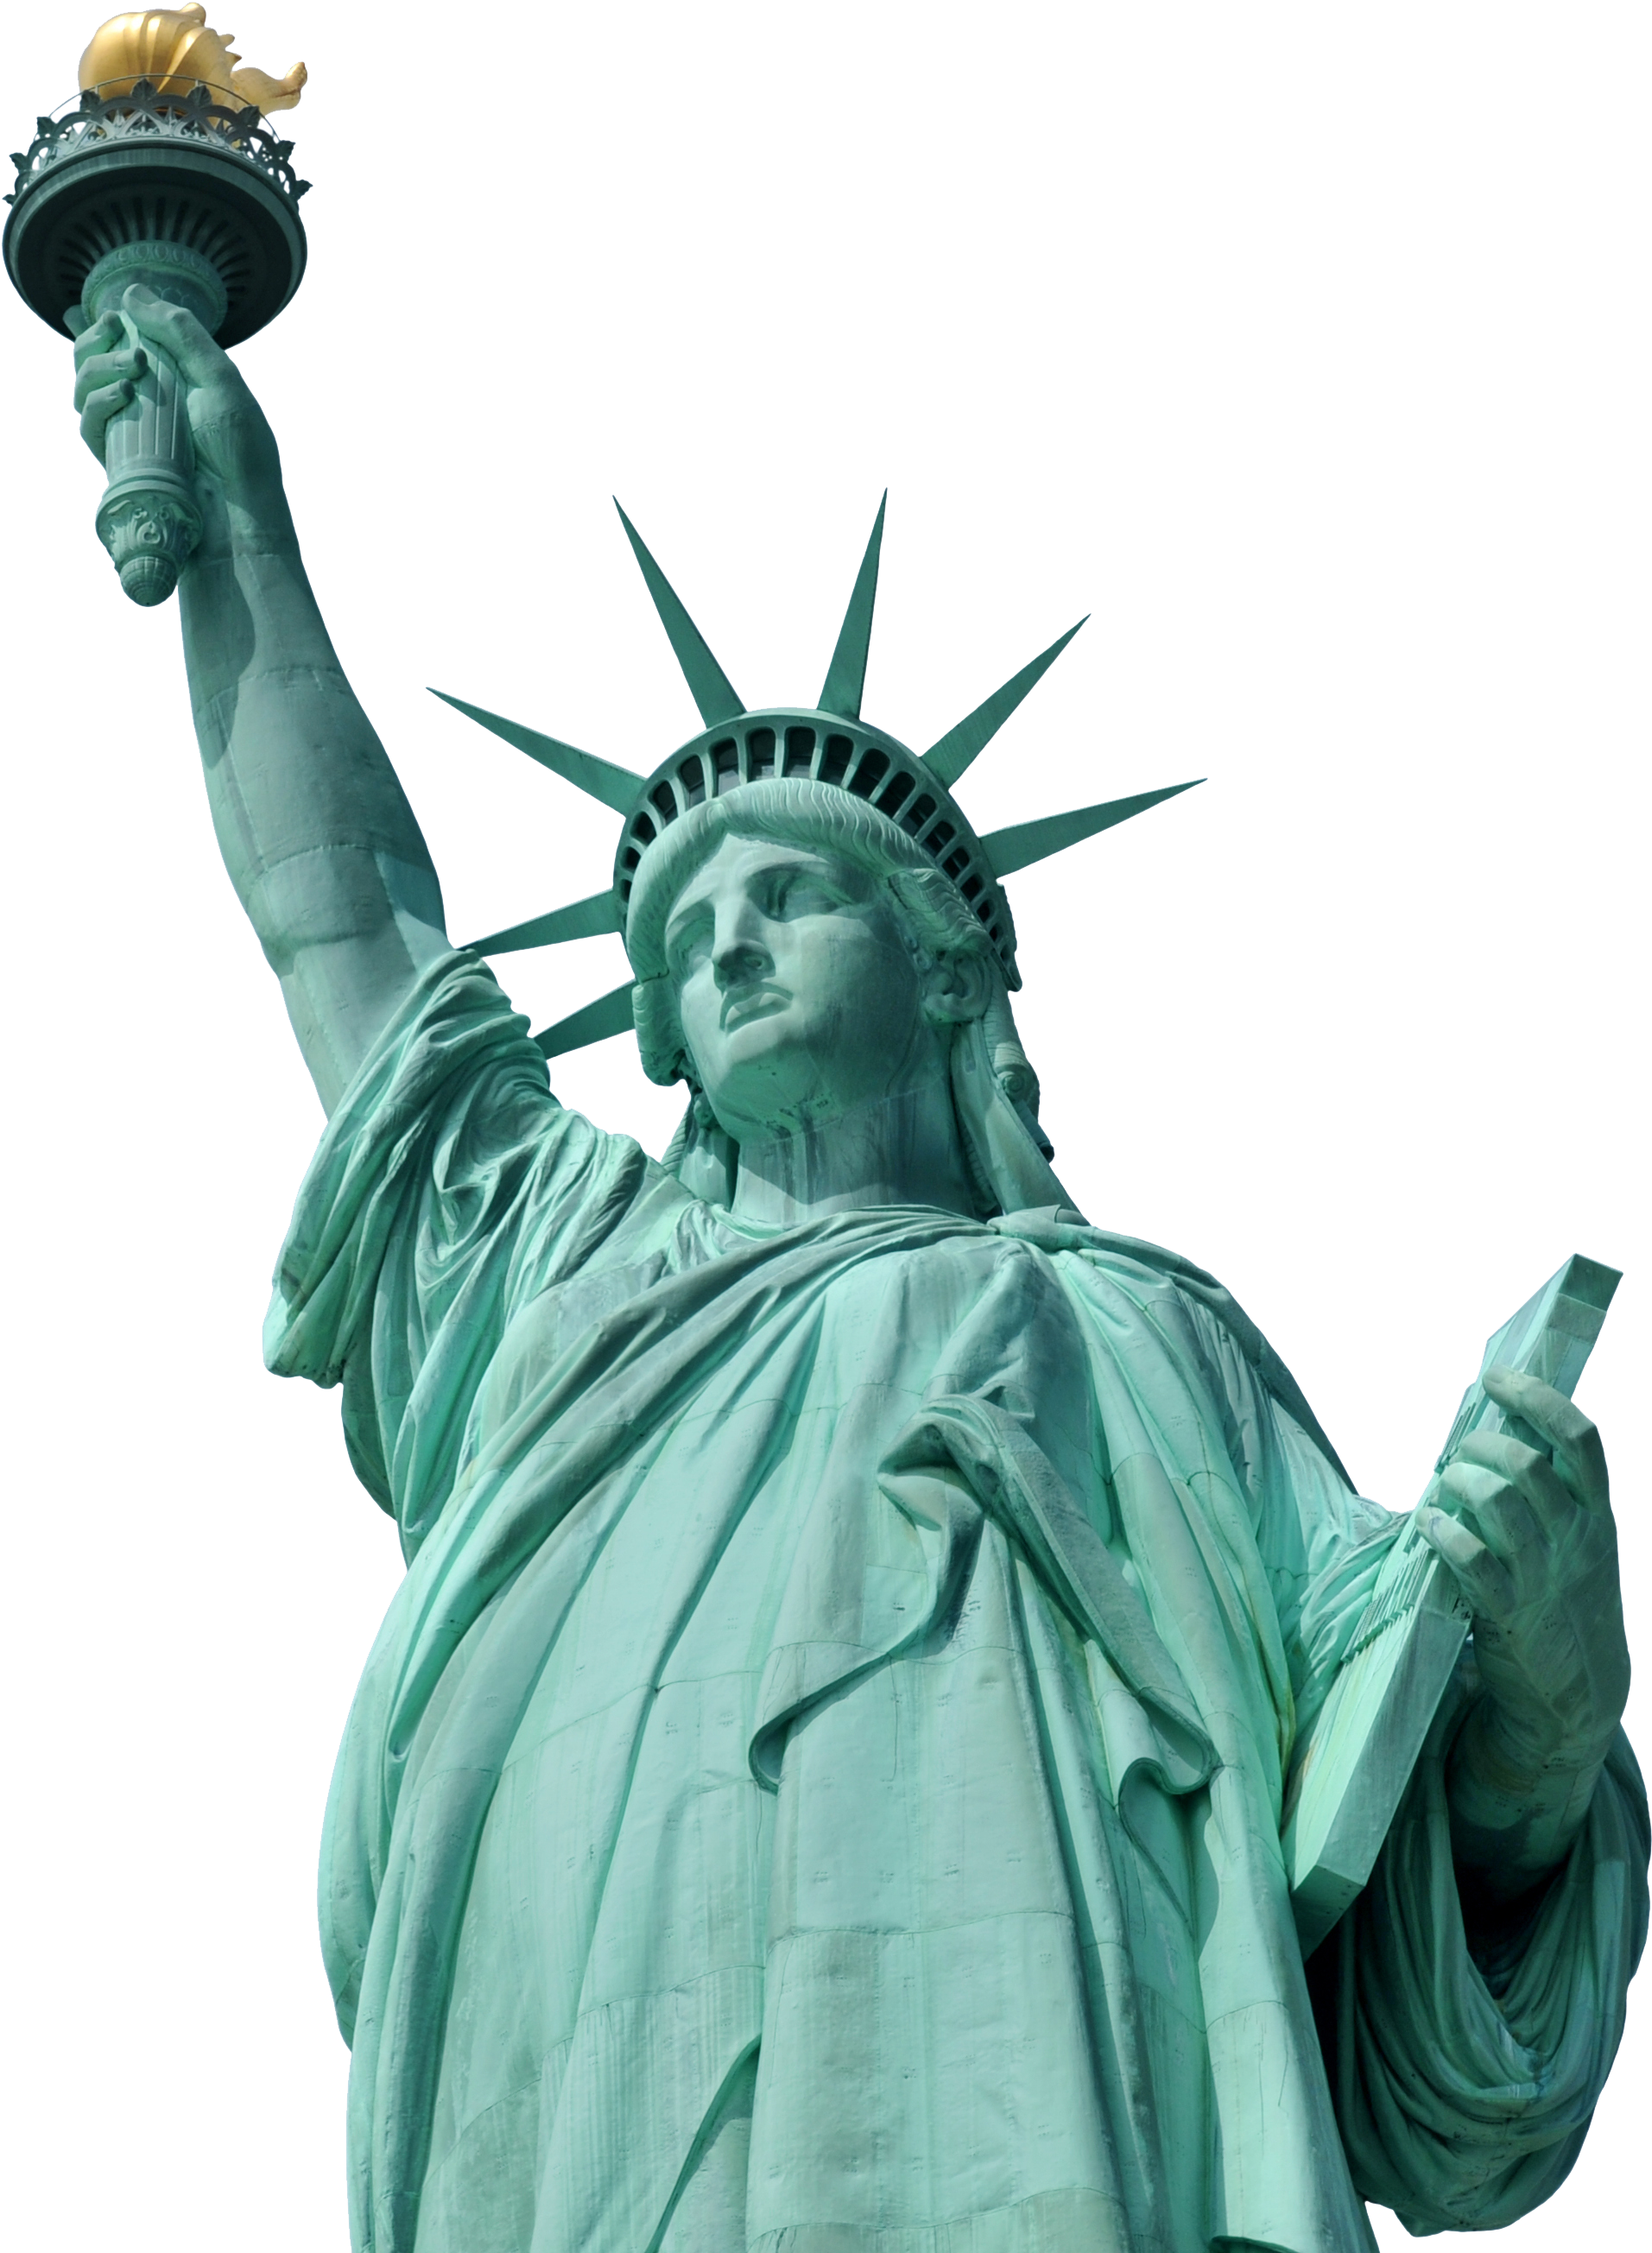 A Statue Of A Woman Holding A Torch And A Torch With Statue Of Liberty In The Background